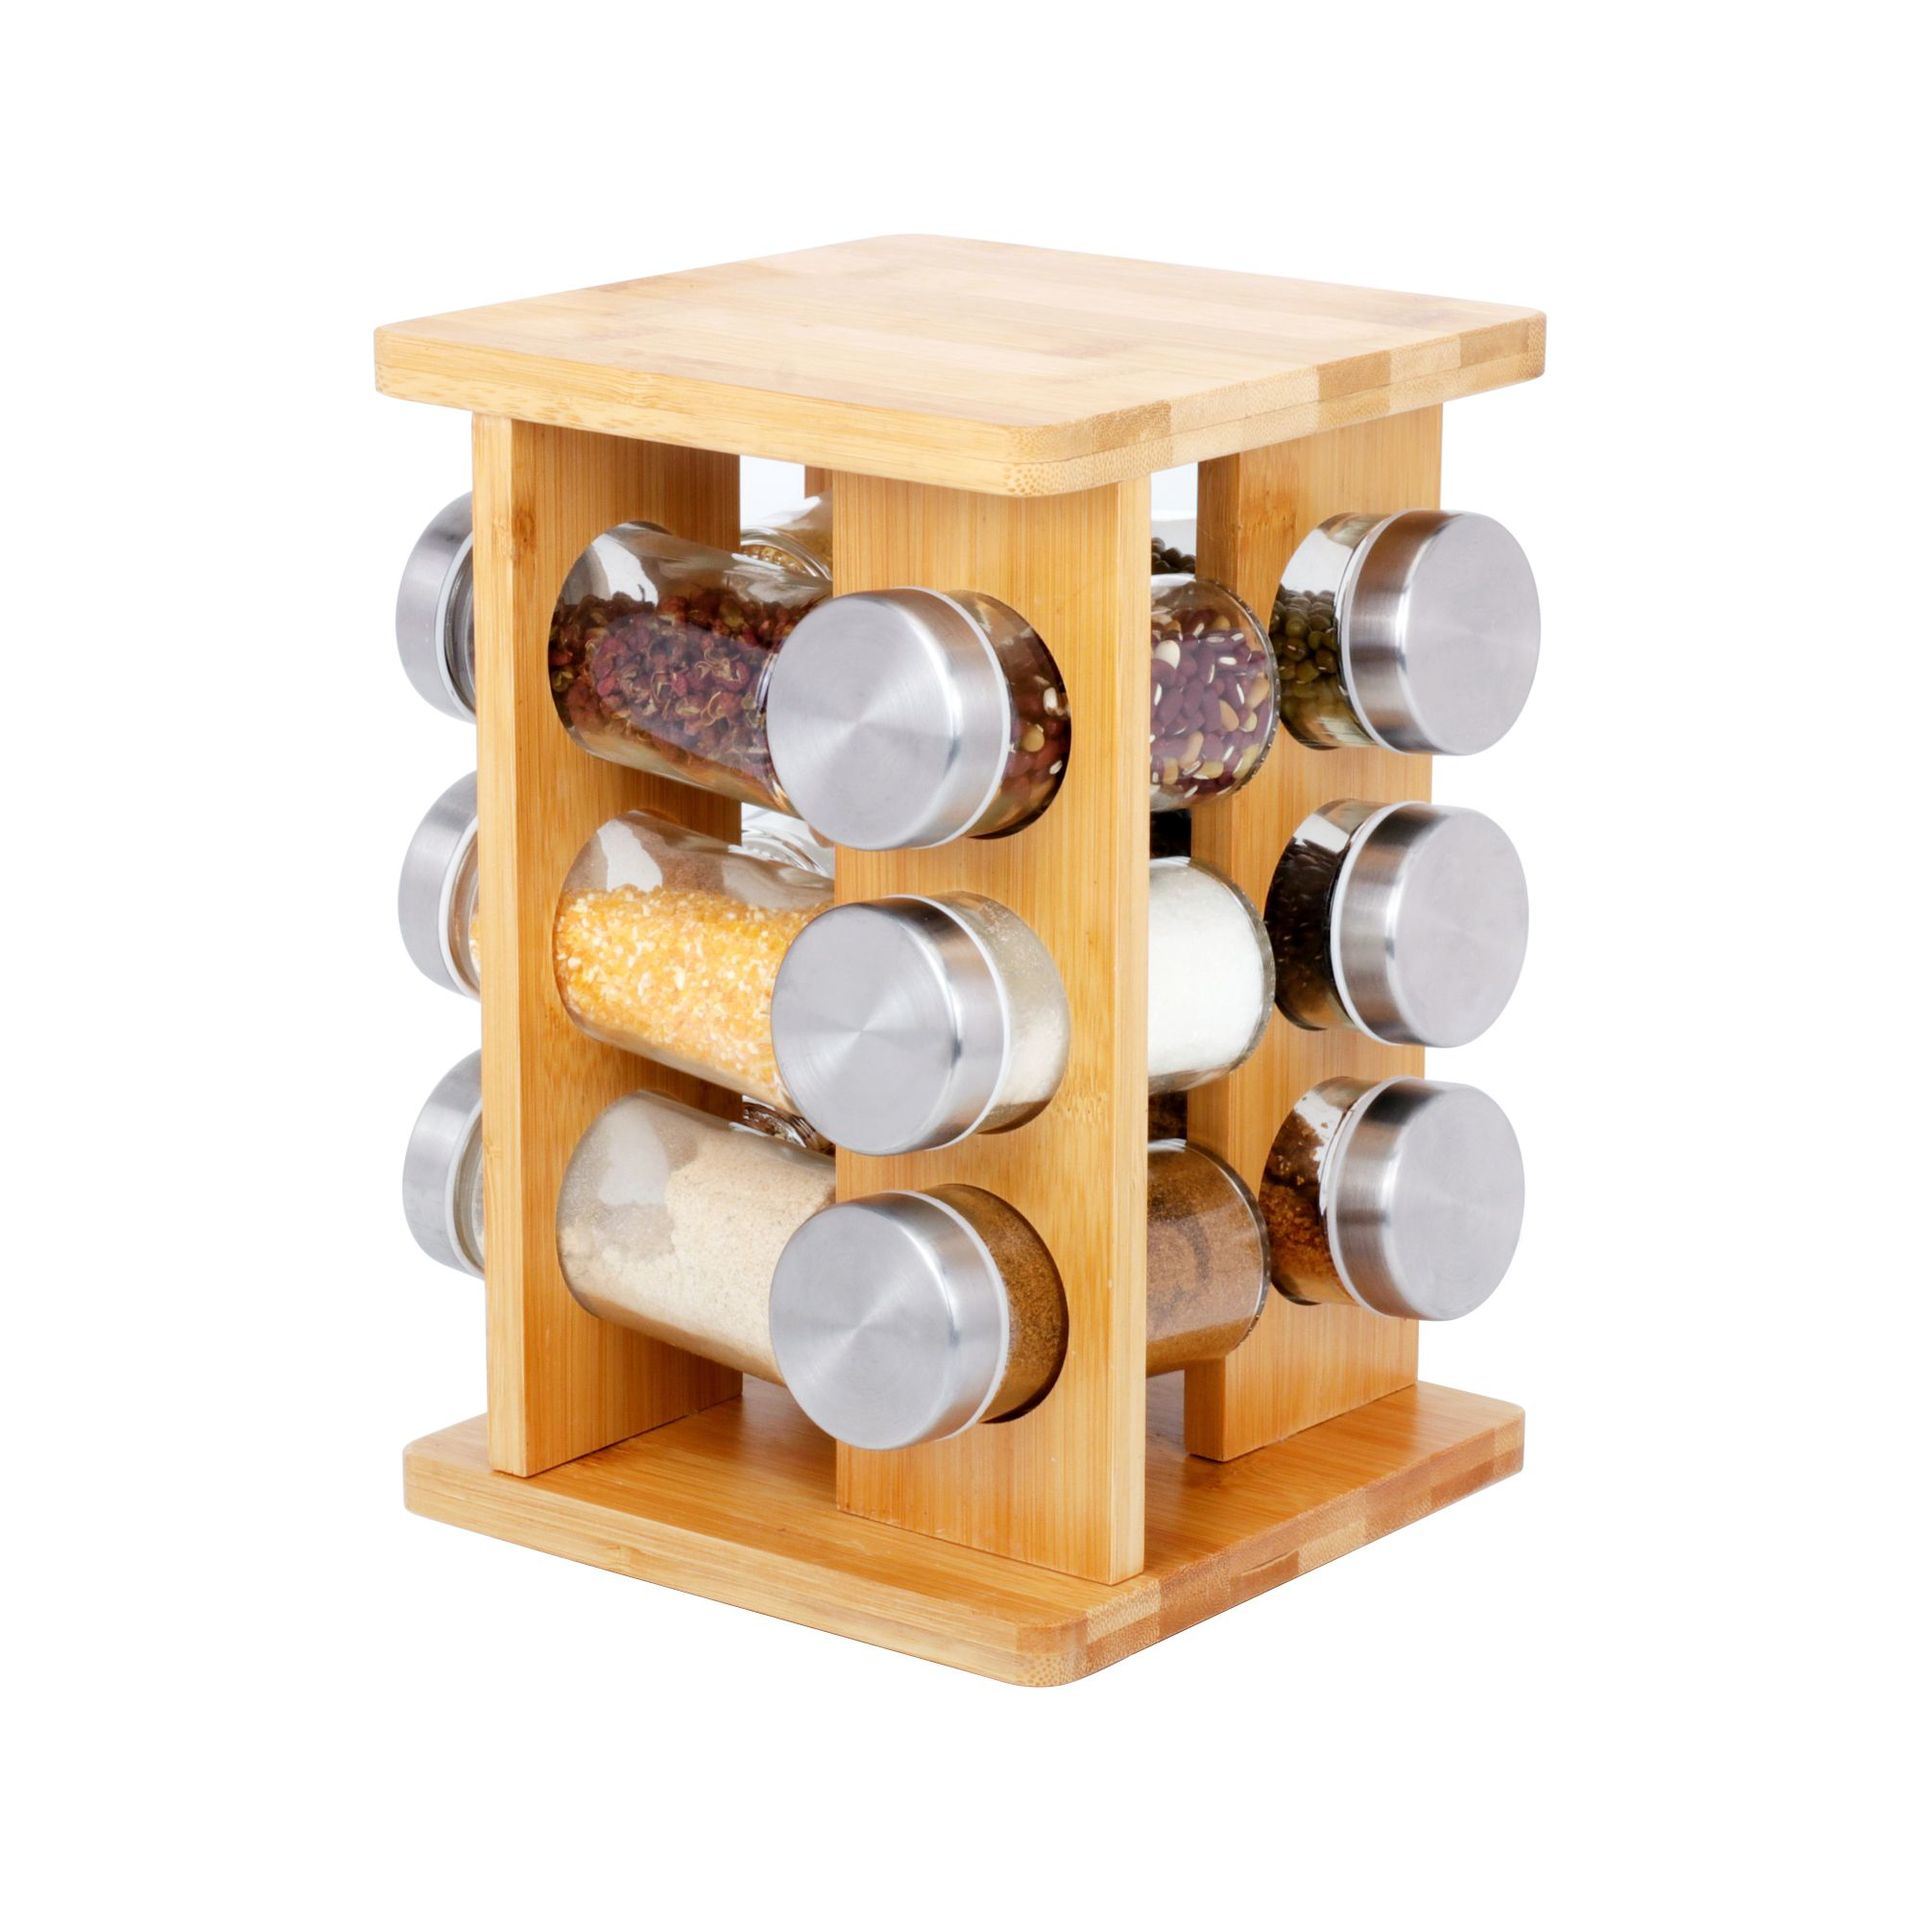 12-Jar Revolving Spice Rack Organizer - Spinning Countertop Herb and Spice  Rack Organizer with 12 Glass